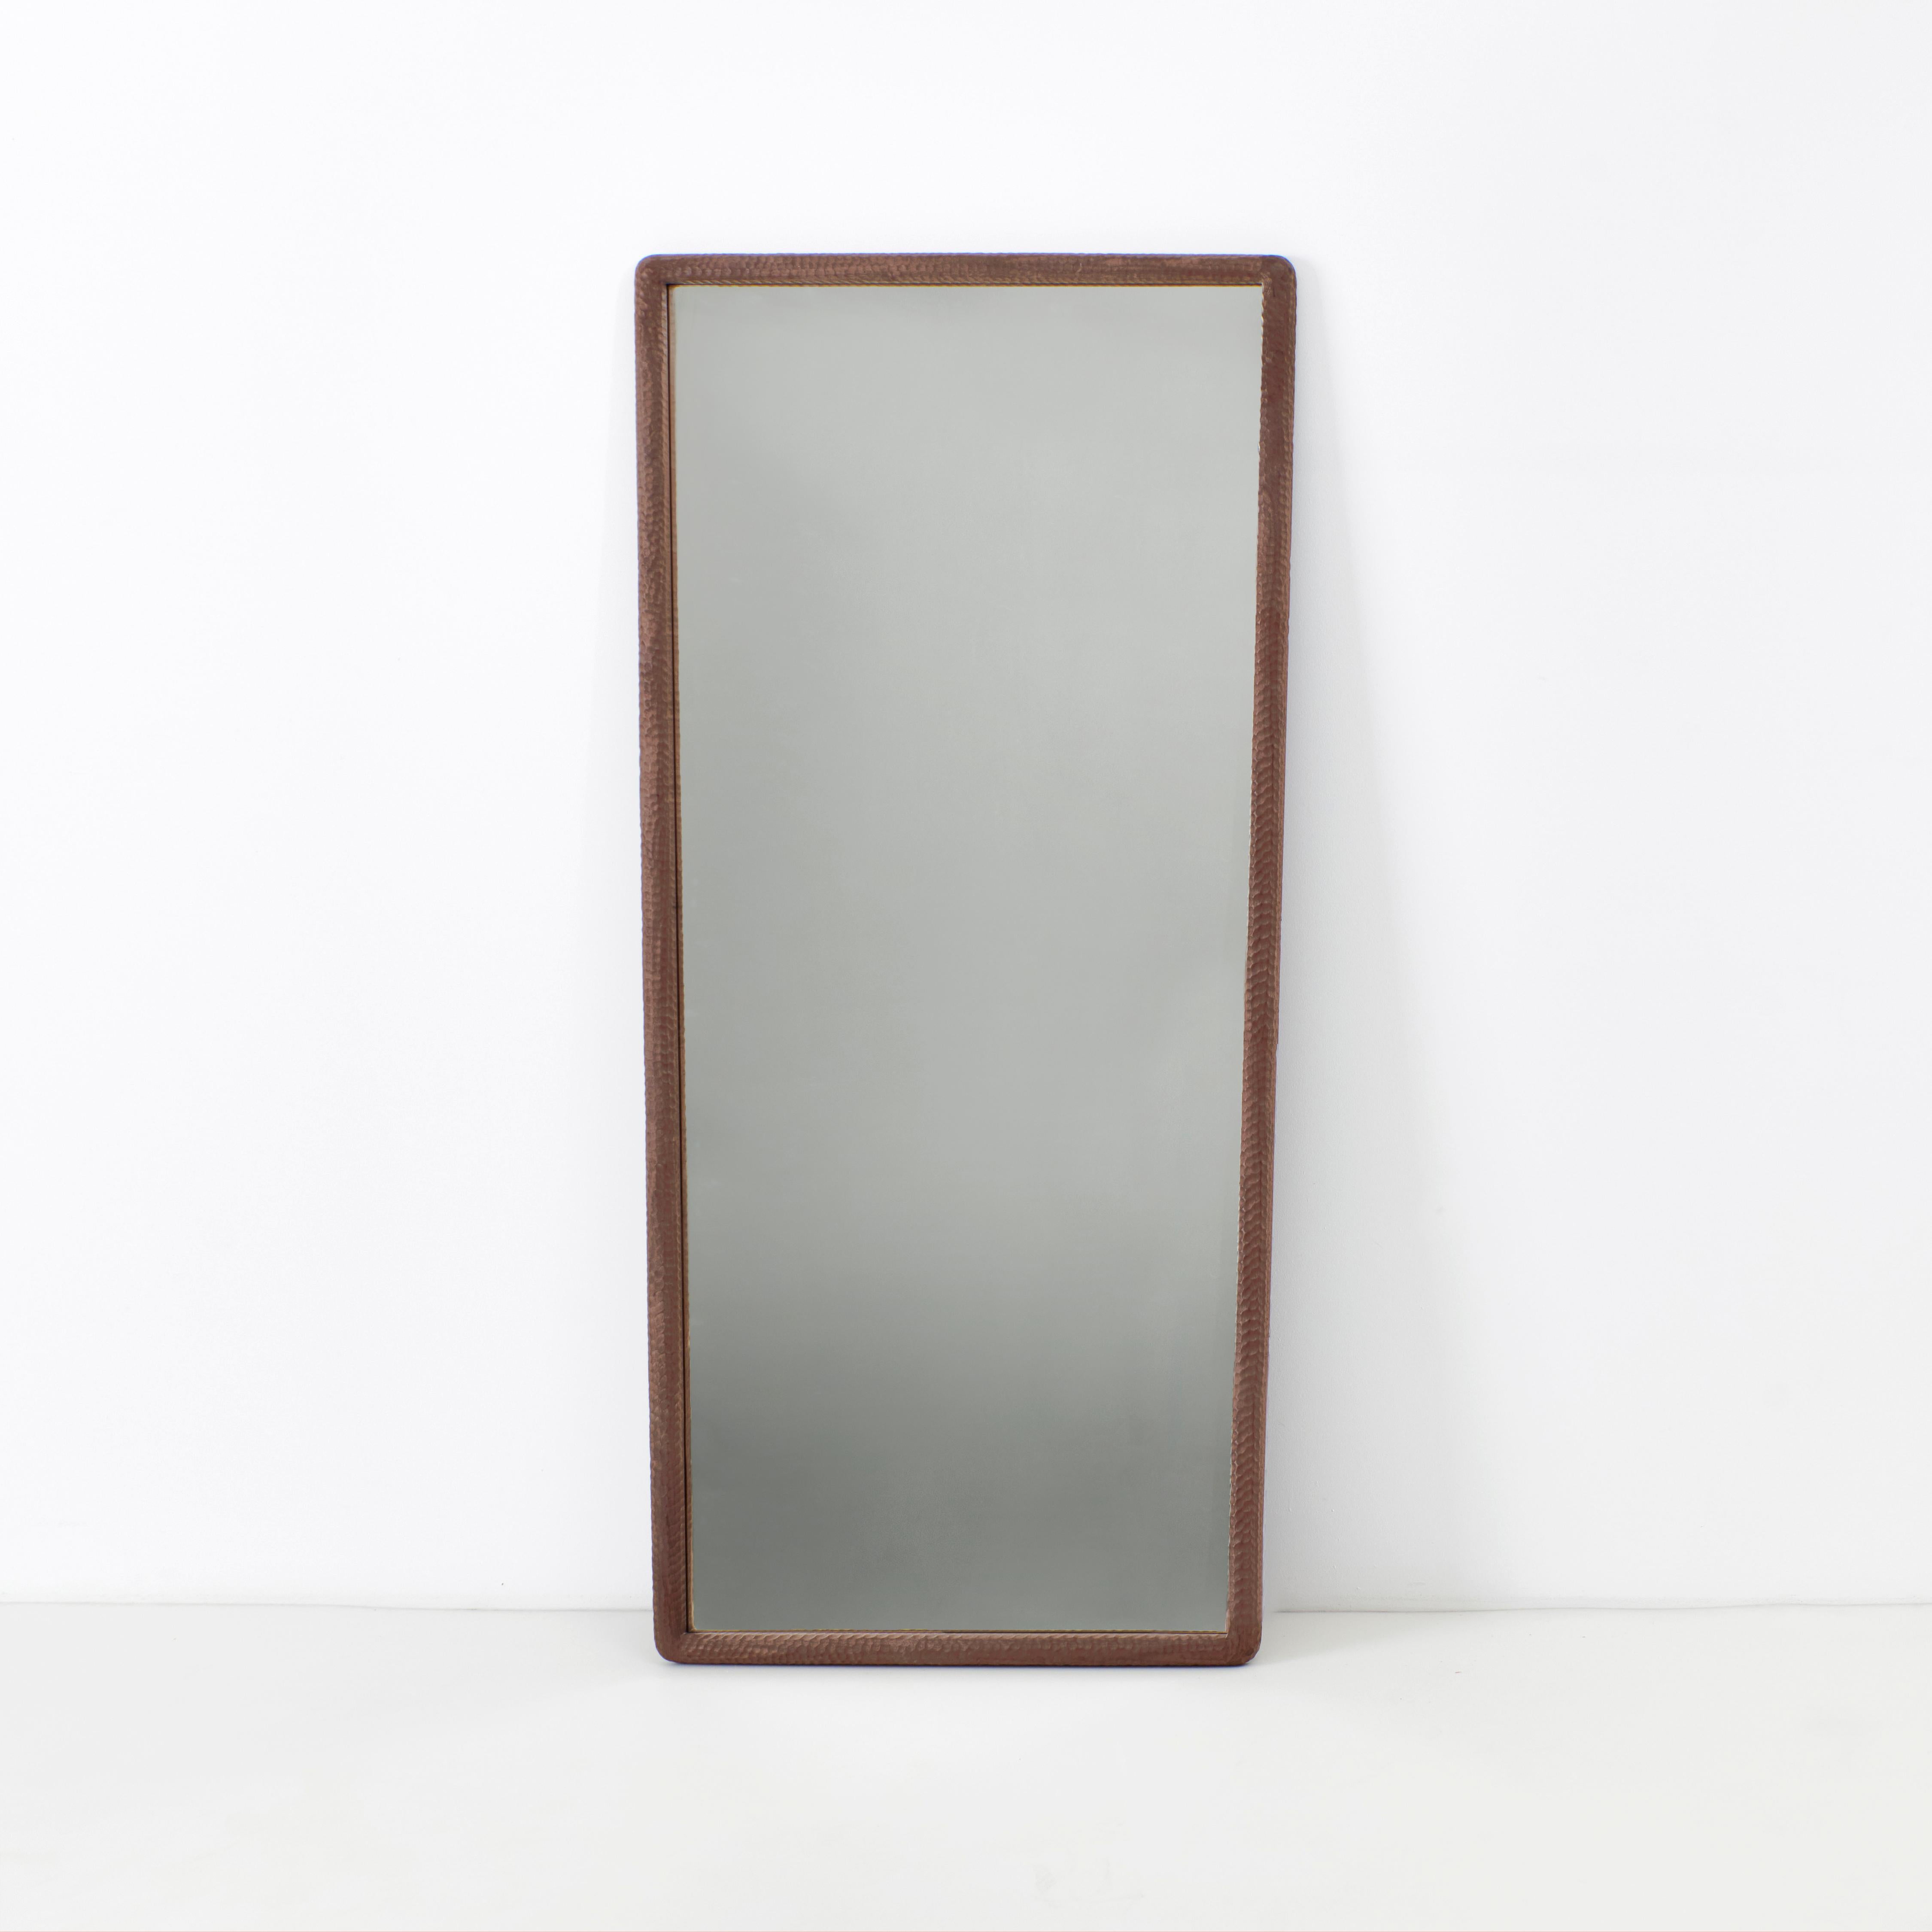 Amarante Mirror Large
Designed in 2024 by Project 213A

The Amarante Mirror is trapez shaped and framed in solid wood. 
Crafted by Skilled artisans in Northern Portugal and finished in a gouged texture

Bespoke dimensions available upon